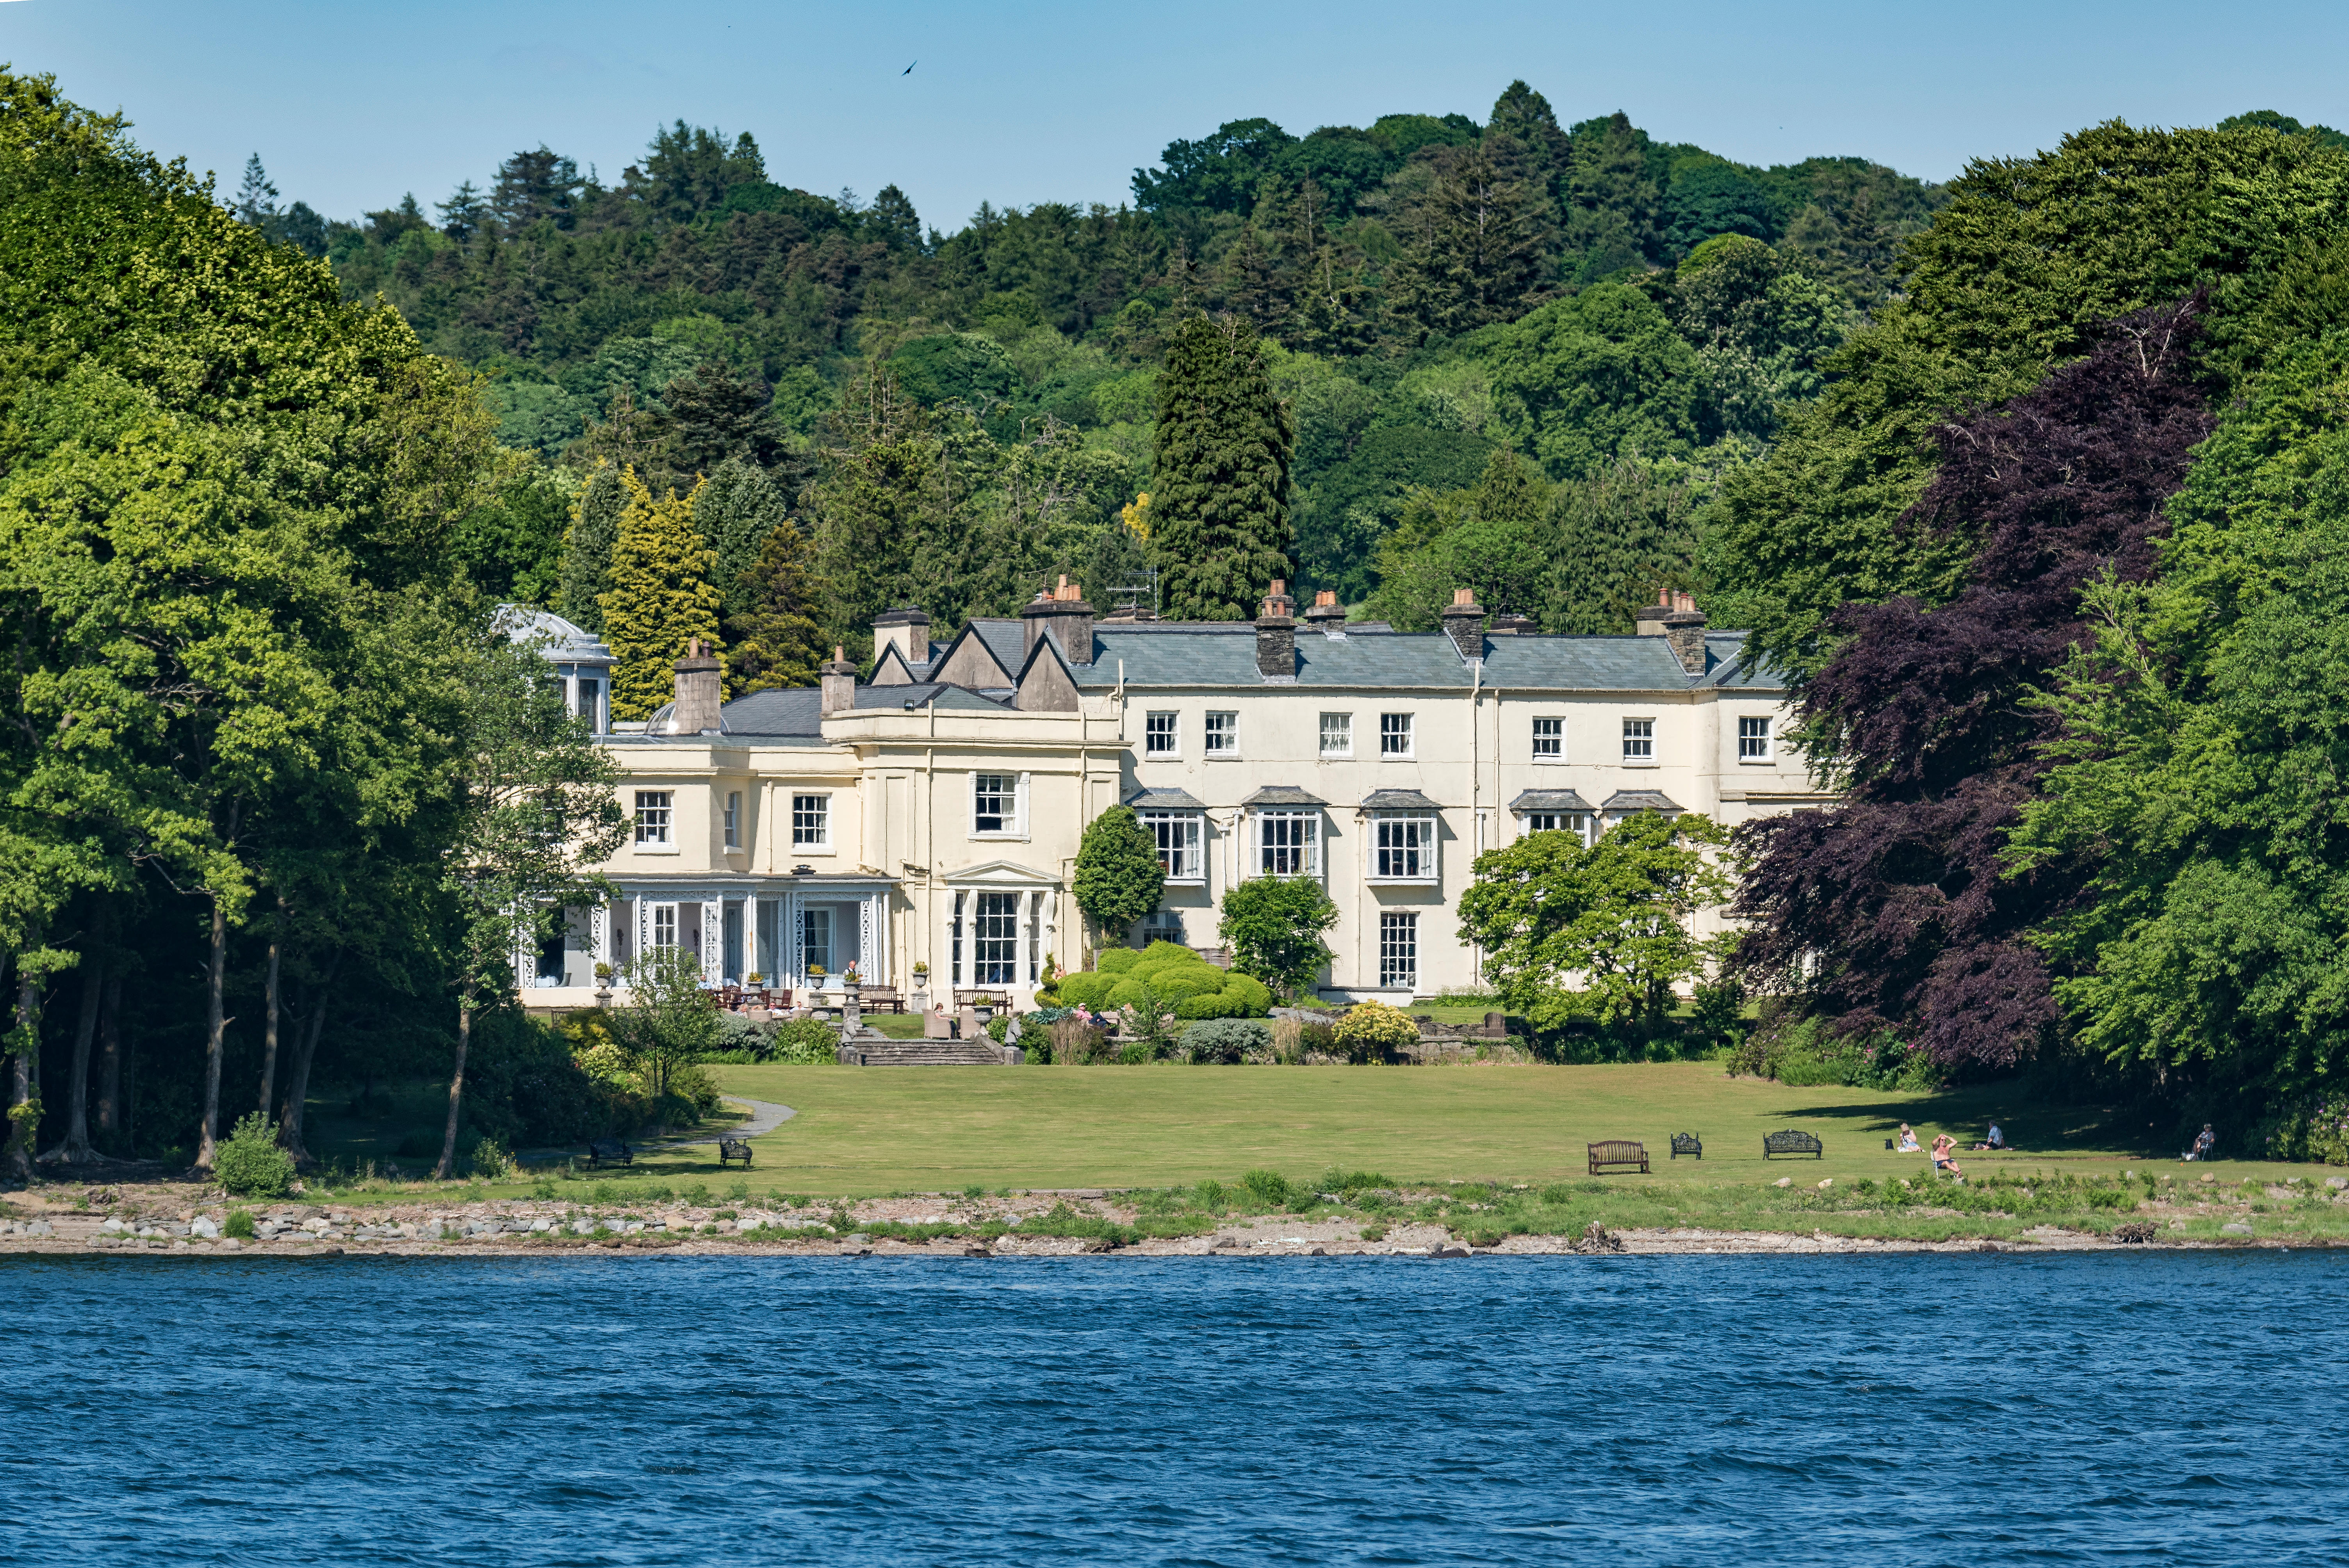 16 Luxury Lake District Hotels You Have To Stay At